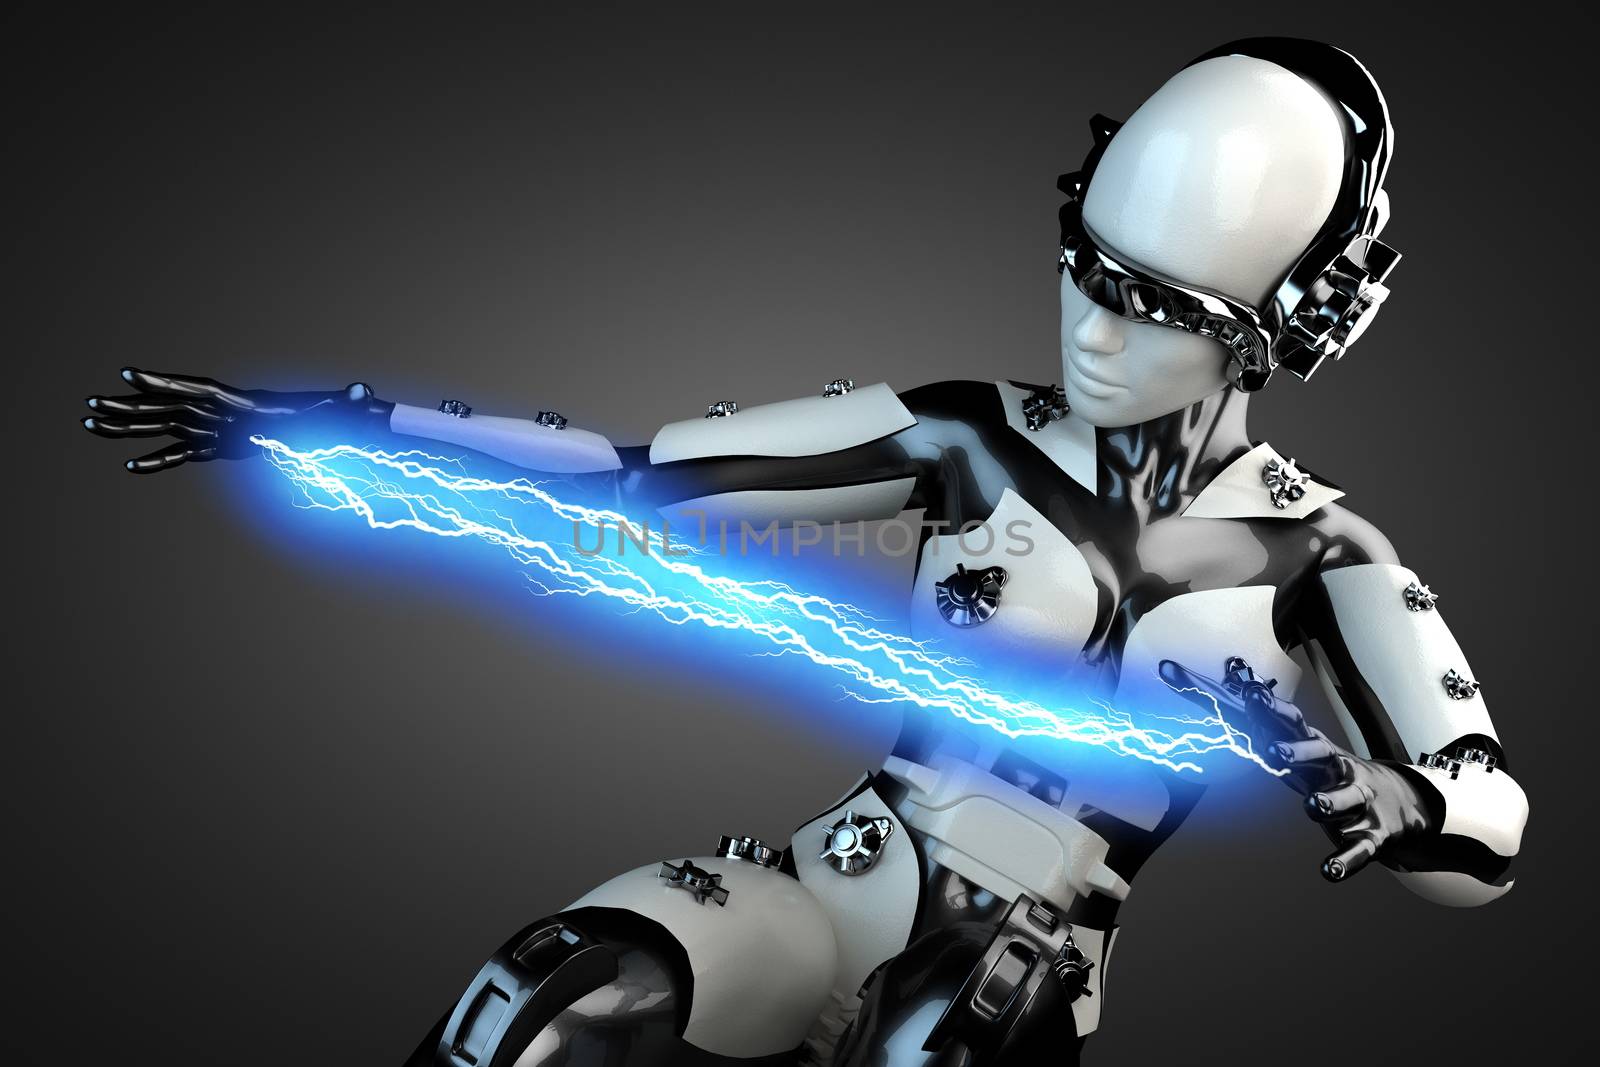 woman cyborg of steel and white plastic with lightning